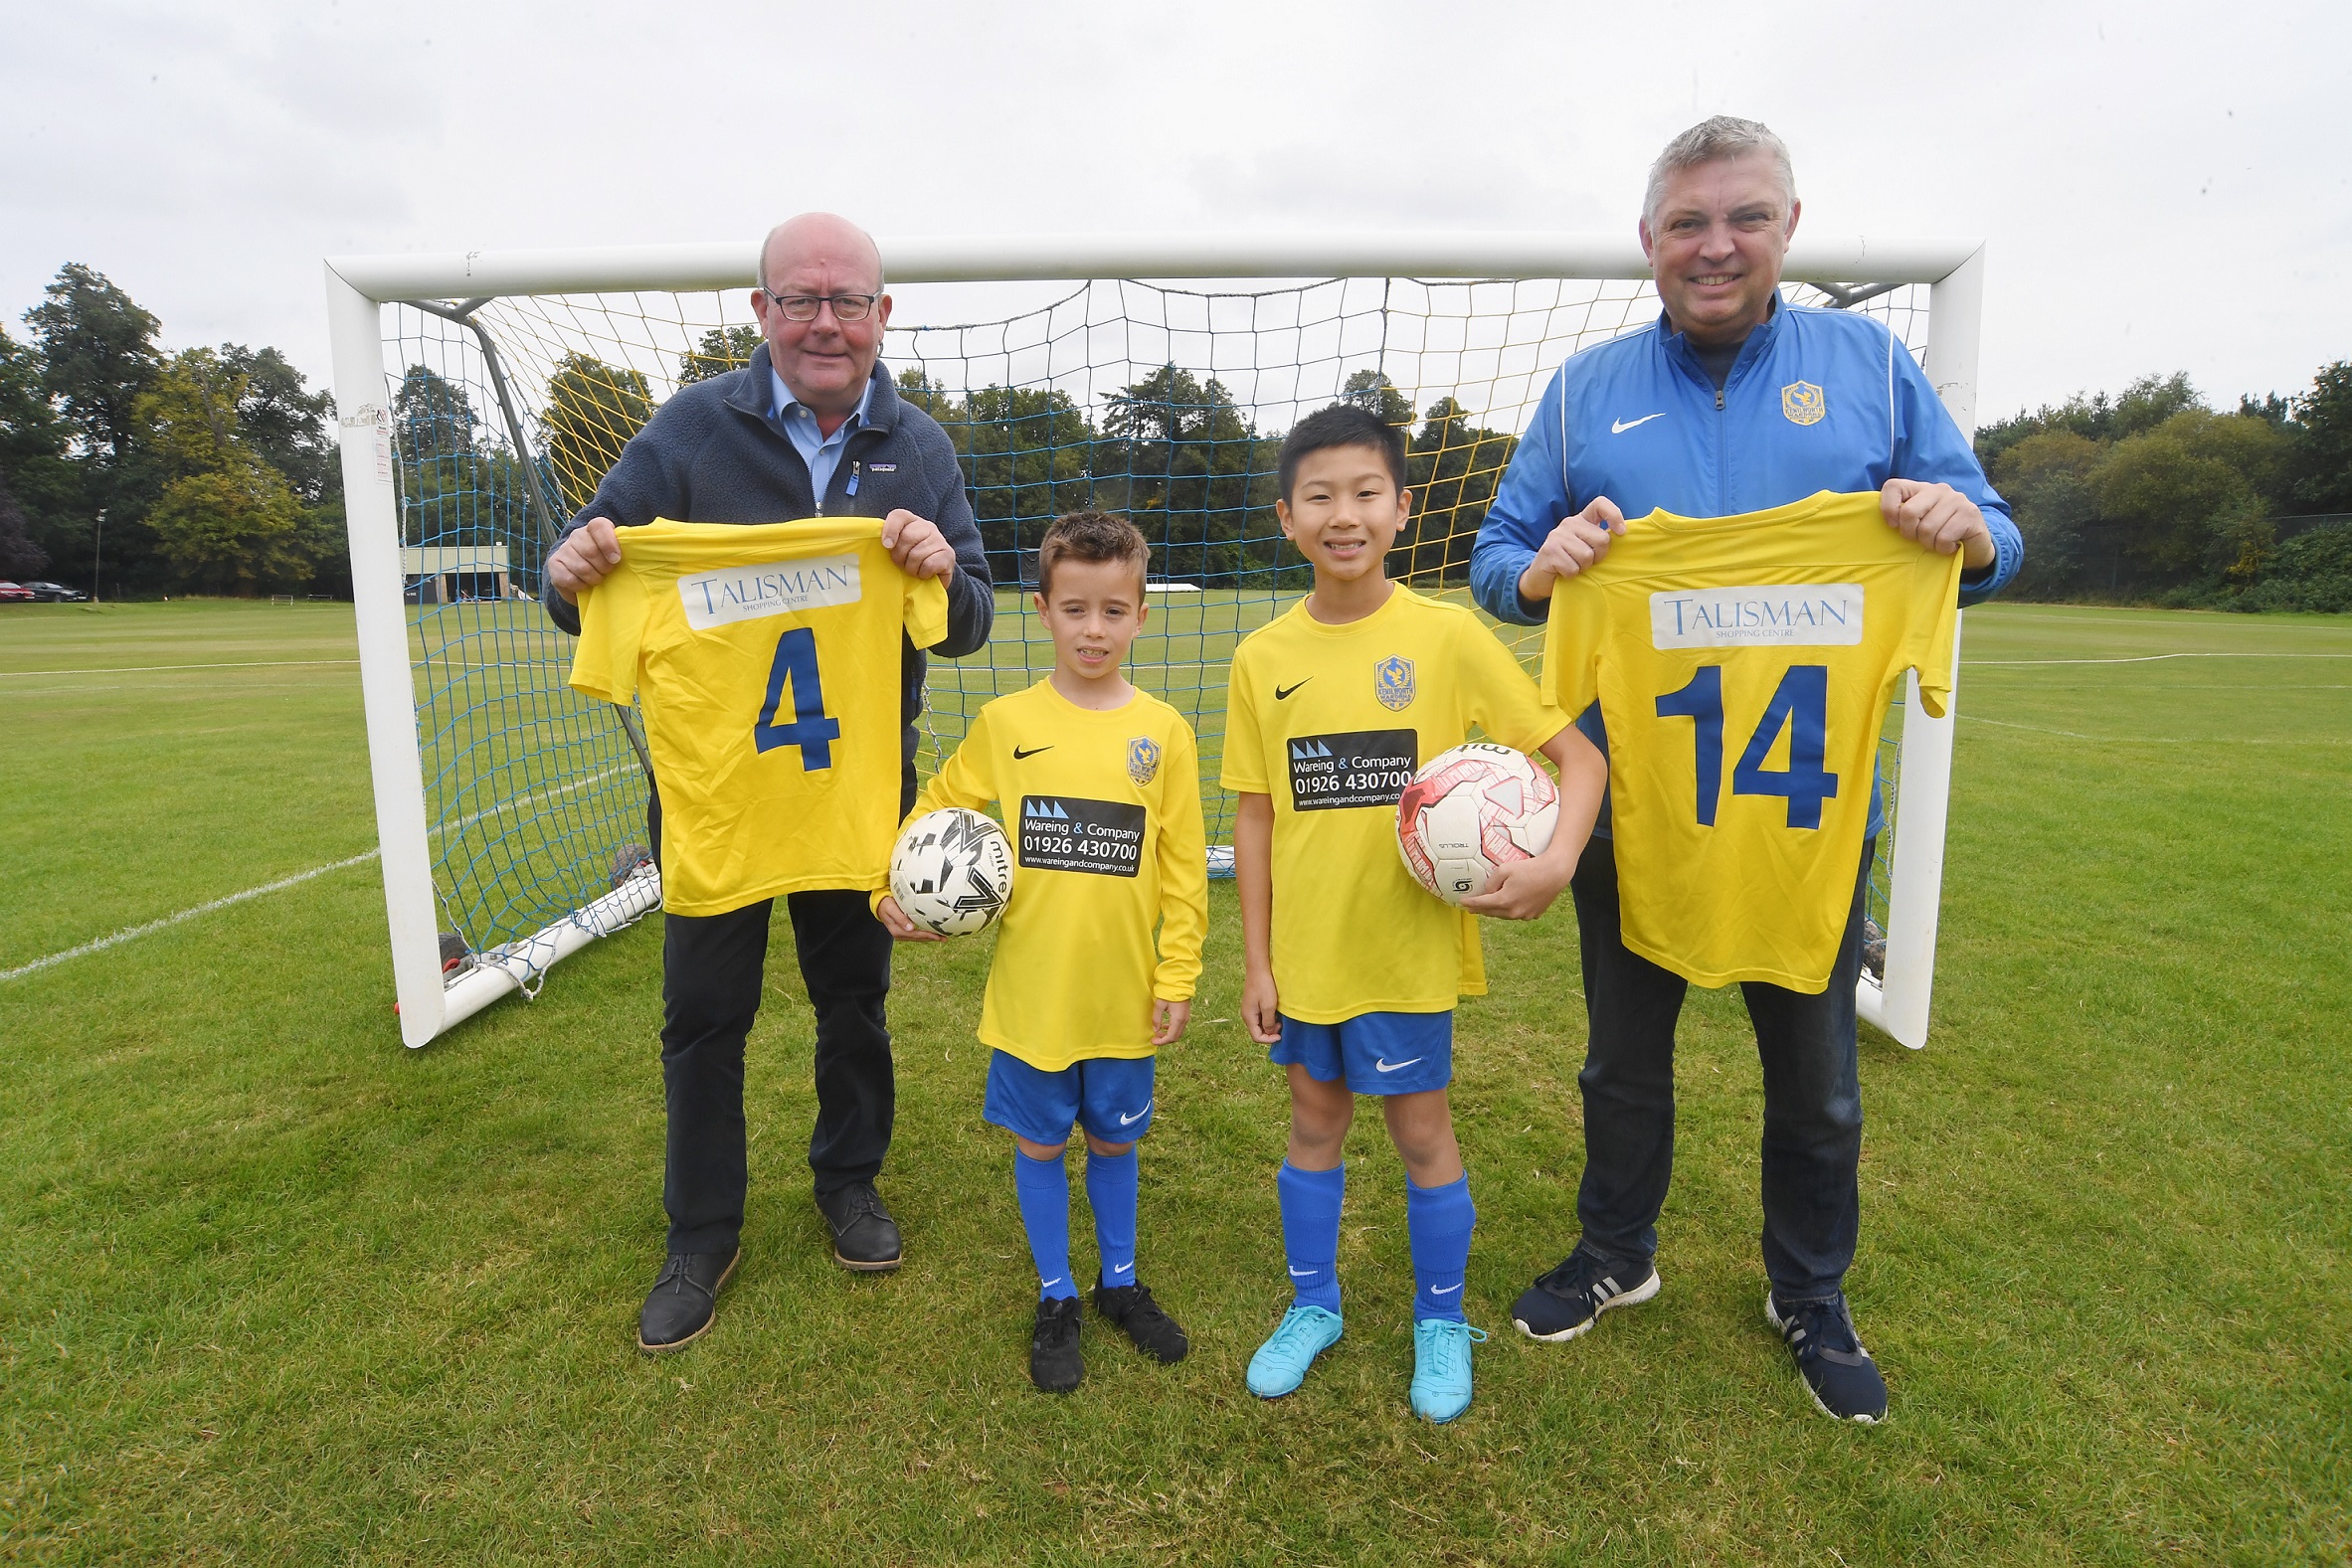 The new boys’ kit for Kenilworth Wardens Junior Football Club, sponsored by Talisman Shopping Centre and Wareing & Company. From left: Bill Wareing, Oliver Hales (7), Oscar Hua (11), Andrew Watts.